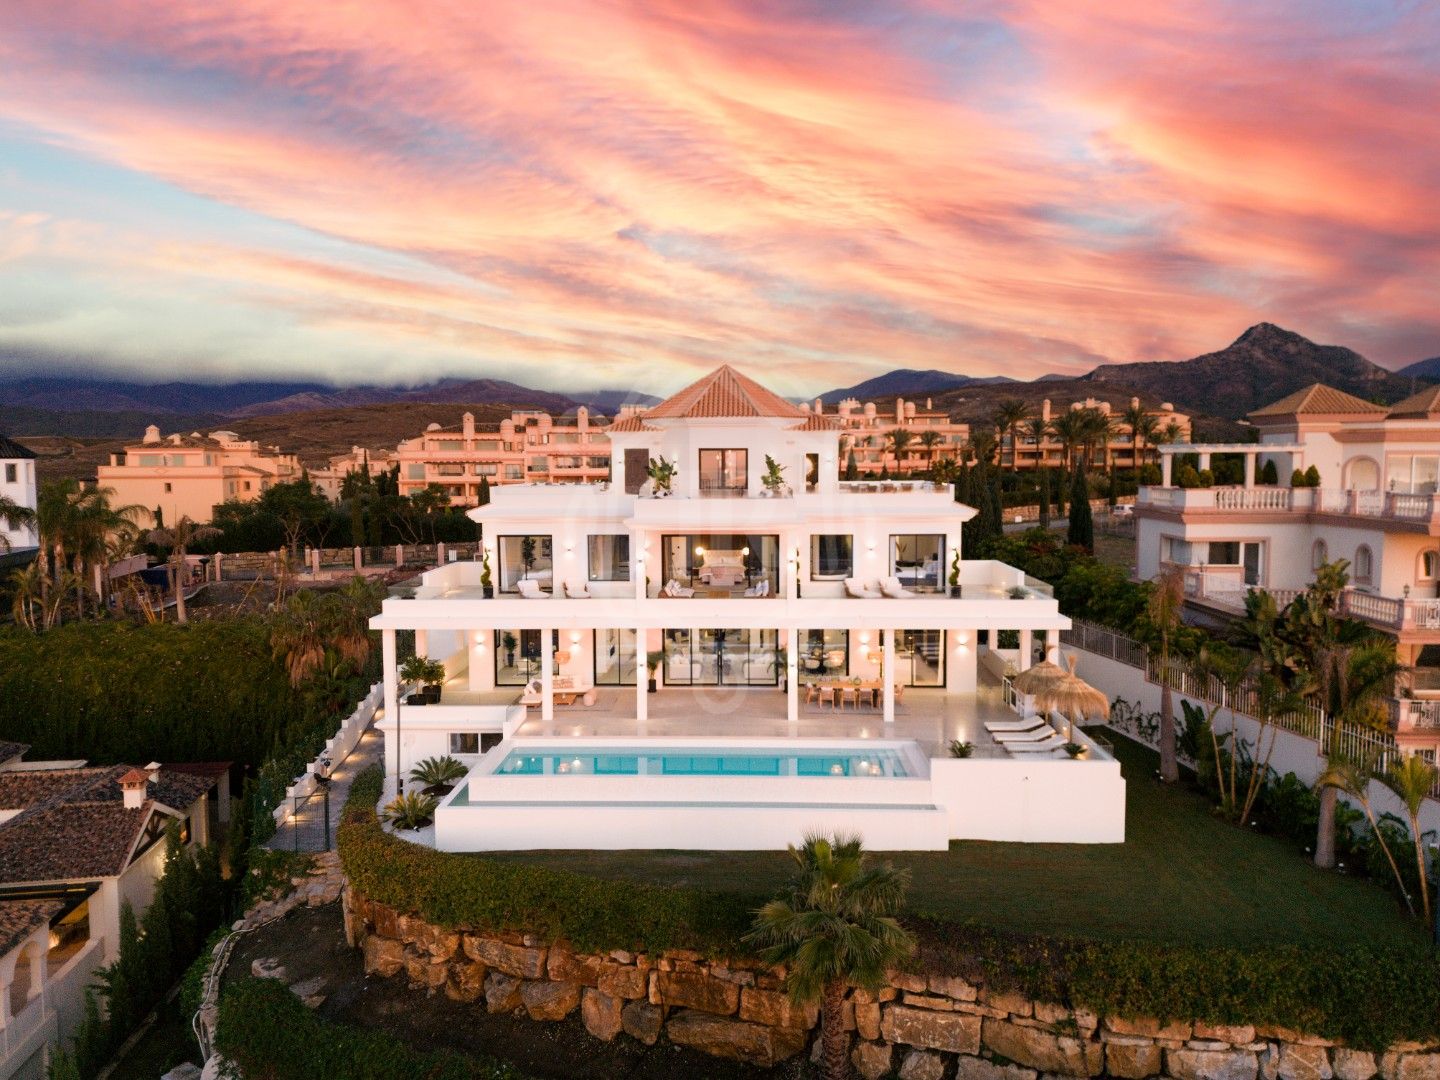 SUMPTUOUS CONTEMPORARY VILLA WITH SENSATIONAL VIEWS ON A PRIVILEGED LOCATION